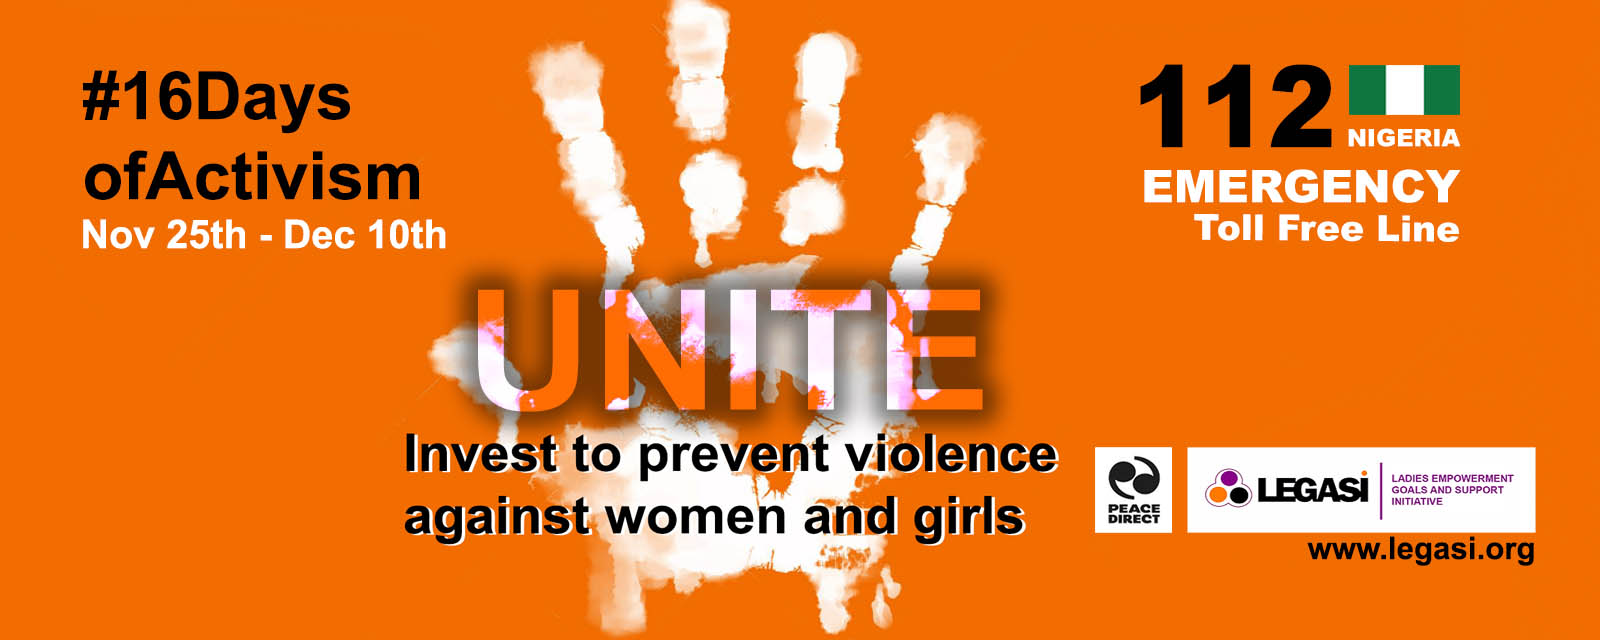 2023 - UNITE! Invest to prevent violence against women and girls